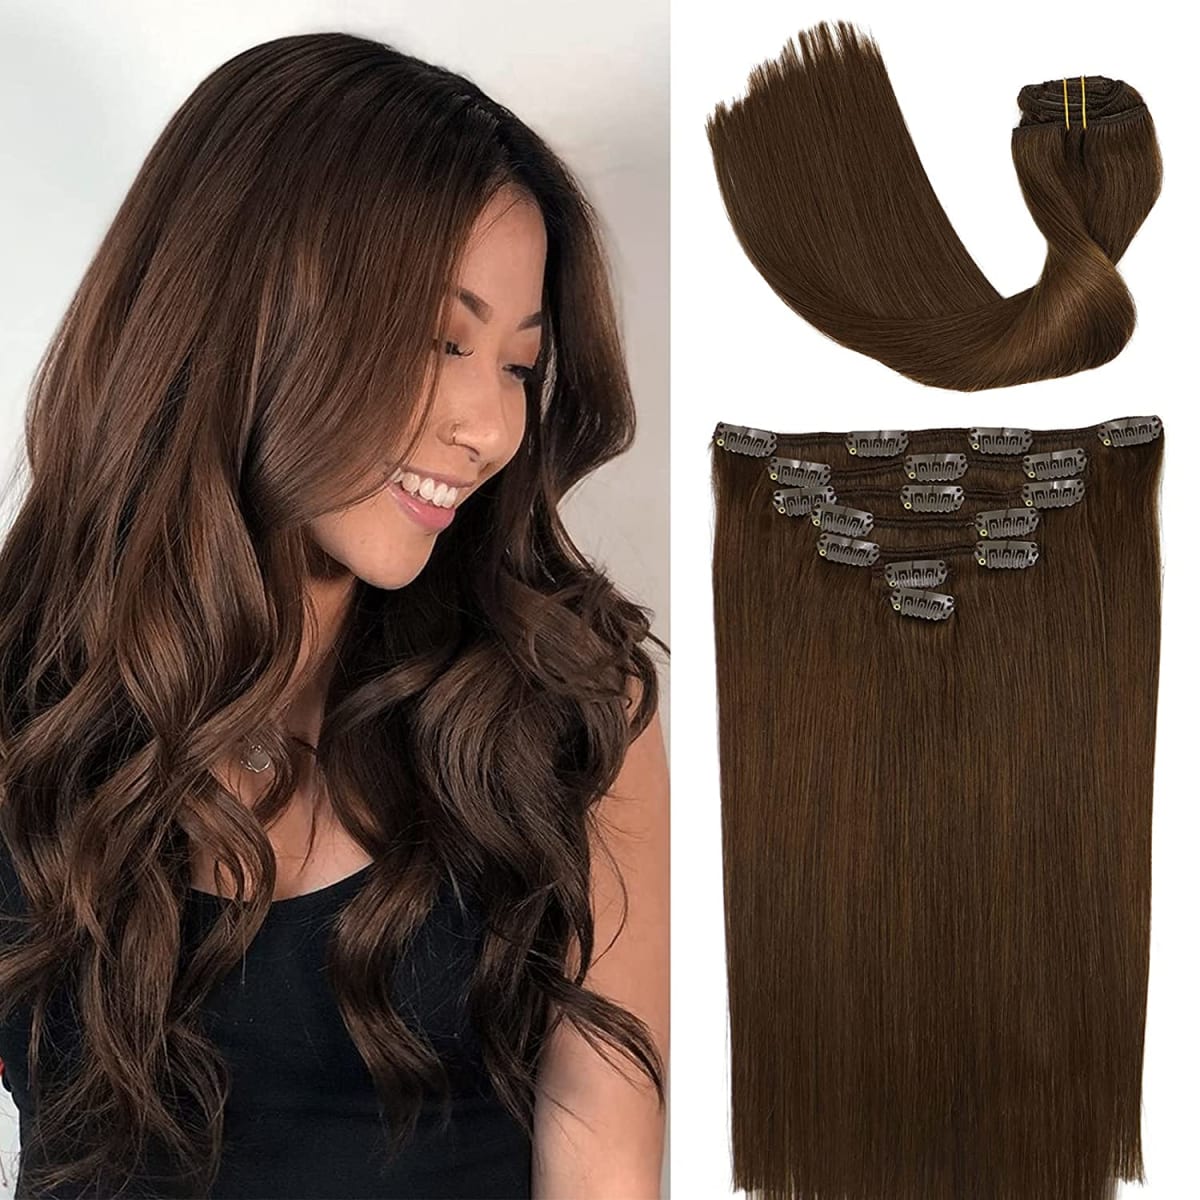 Clip in Human Hair Extensions 7 Pcs 70 Gram Medium Brown Clip in Real Extensions for Fine Hair Full Head Silky Straight Weft Remy Hair Extensions Clip on for Women 18 Inch